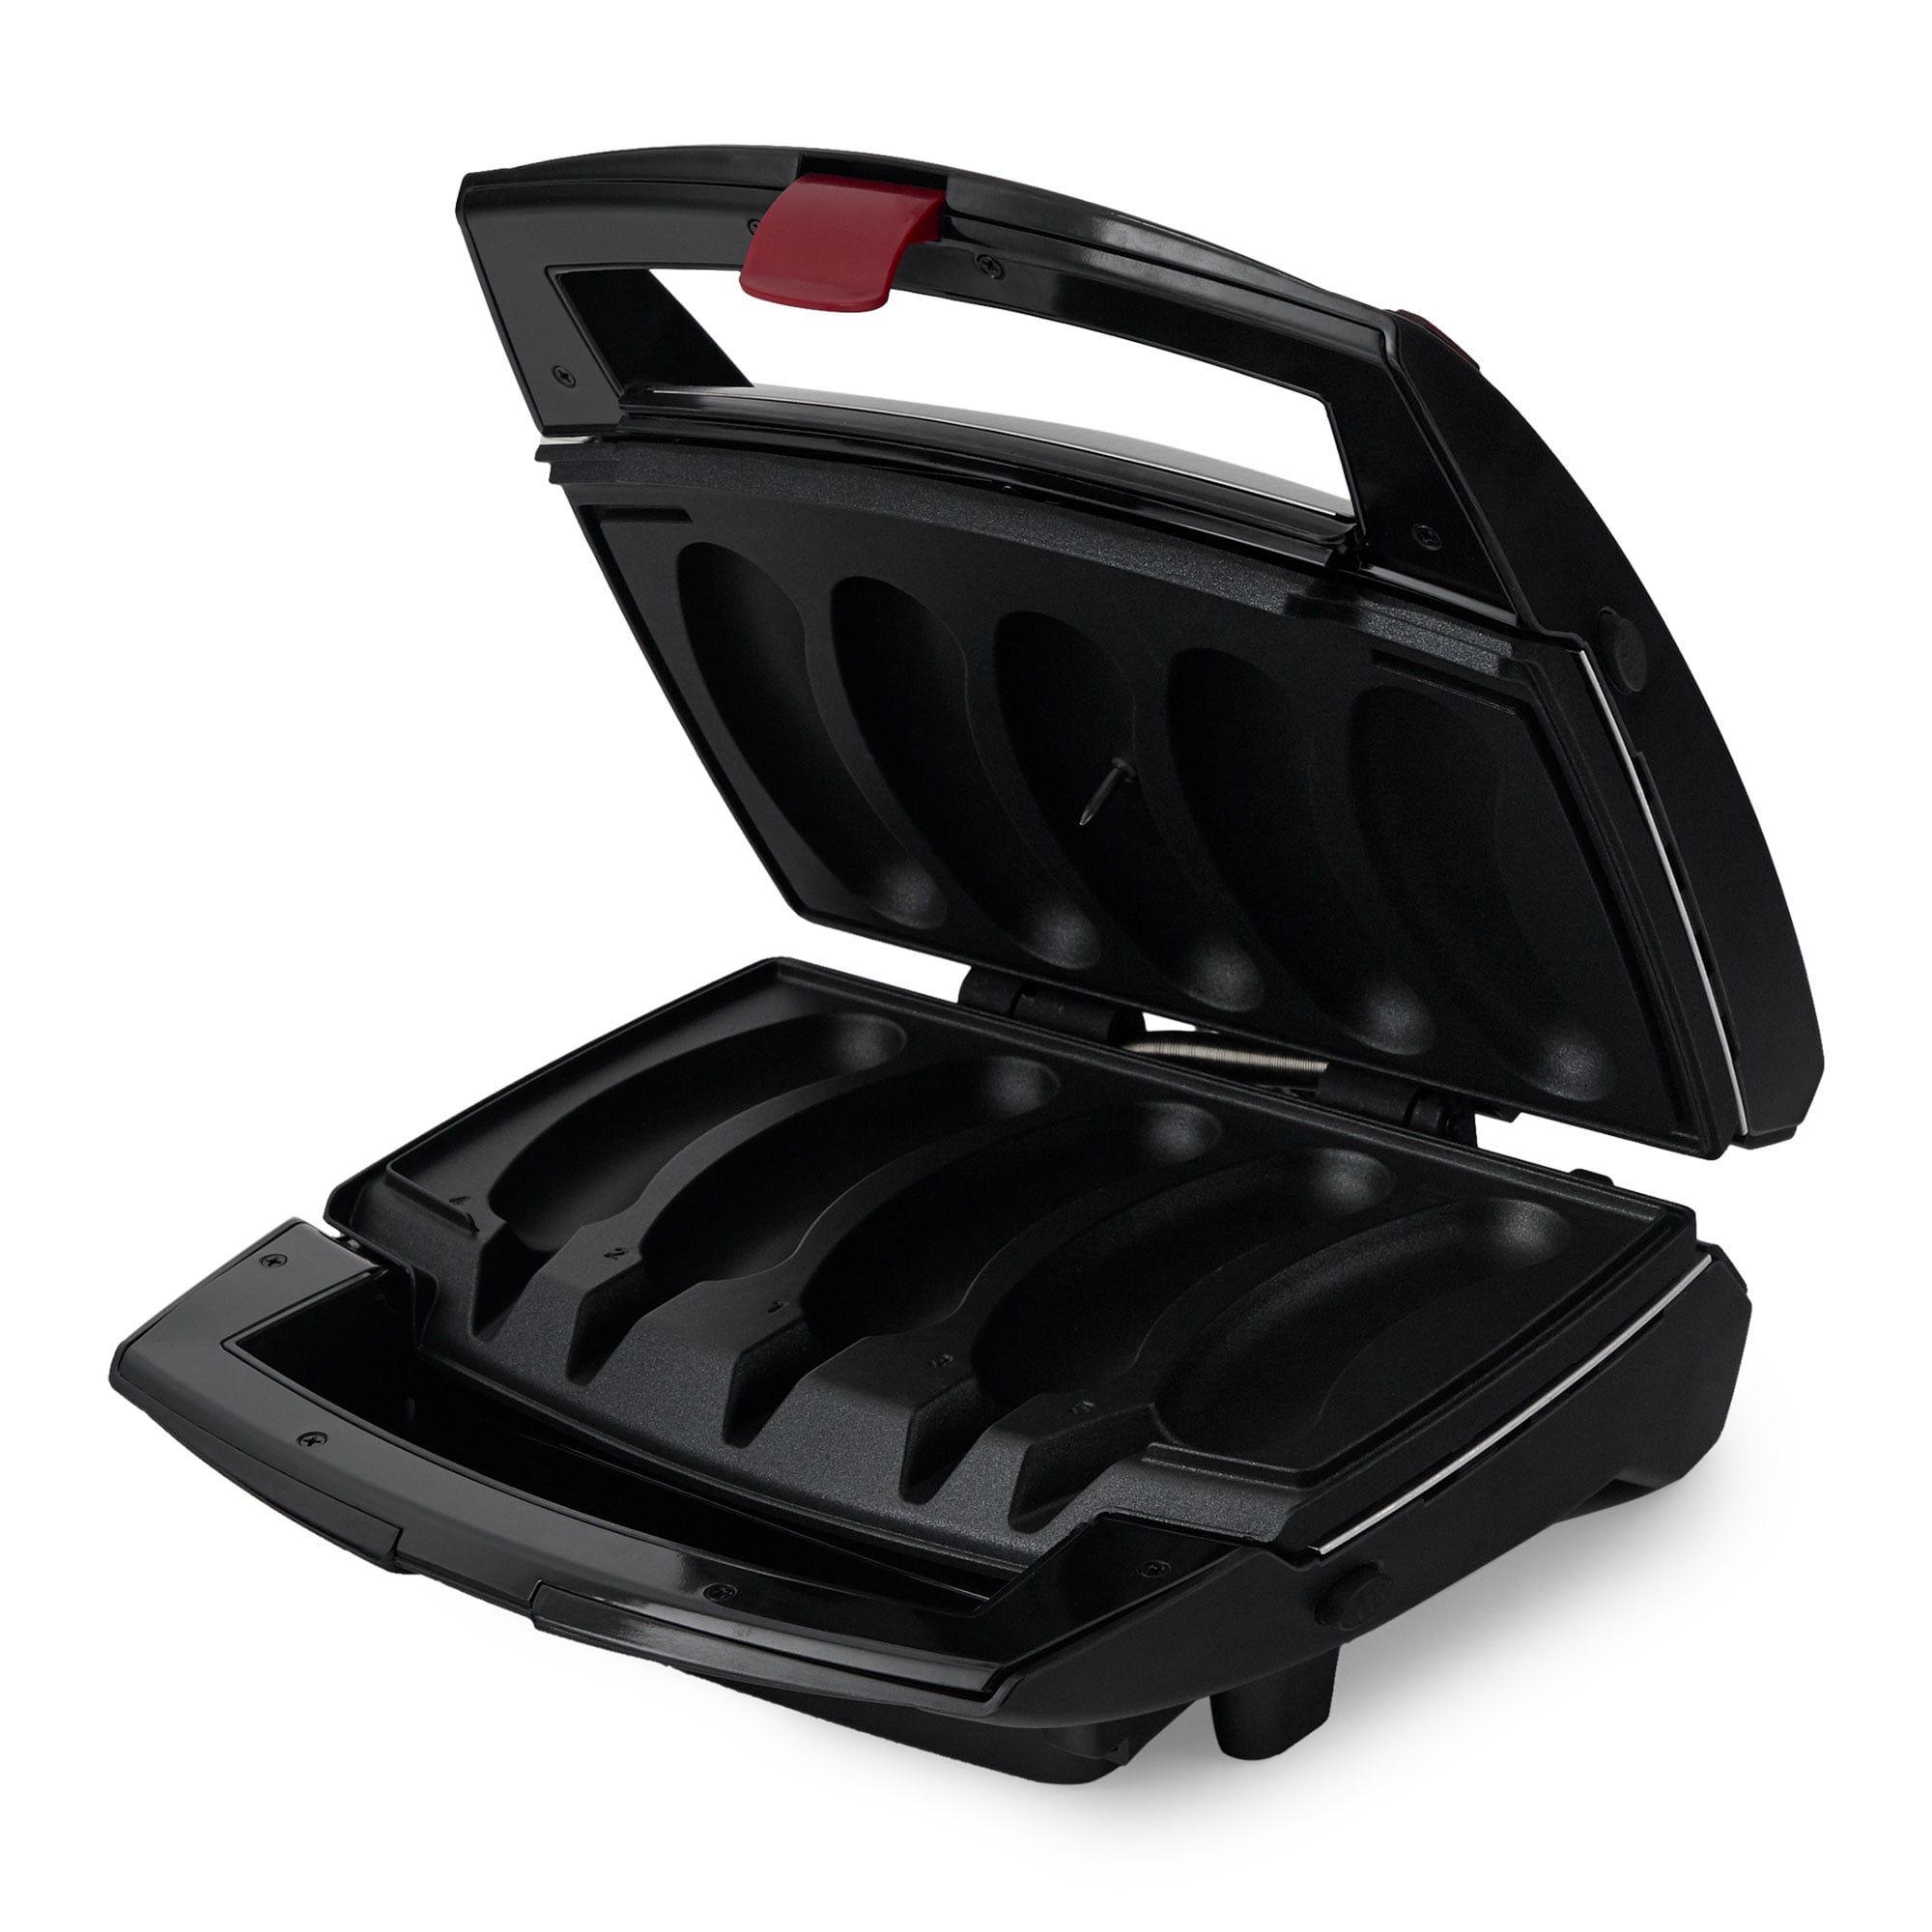 Johnsonville Sizzling Sausage 3-in-1 Indoor Electric Grill